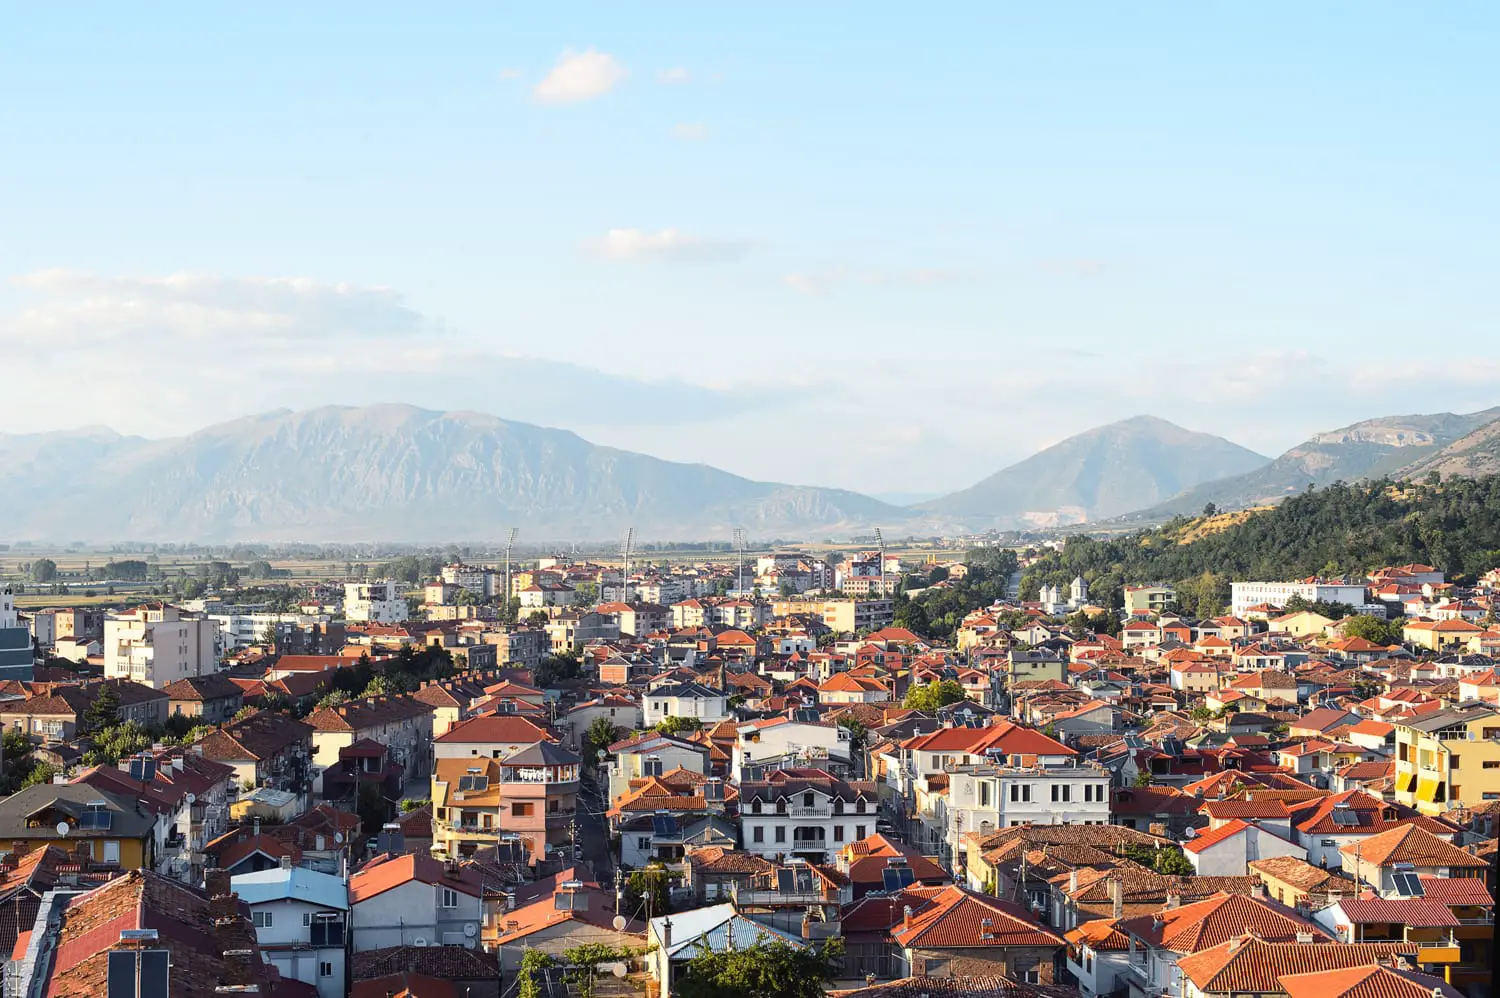 Panoramic aerial view to Korca, the town in southwest of Albania, the mountains and the red tile roofs of its buildings.